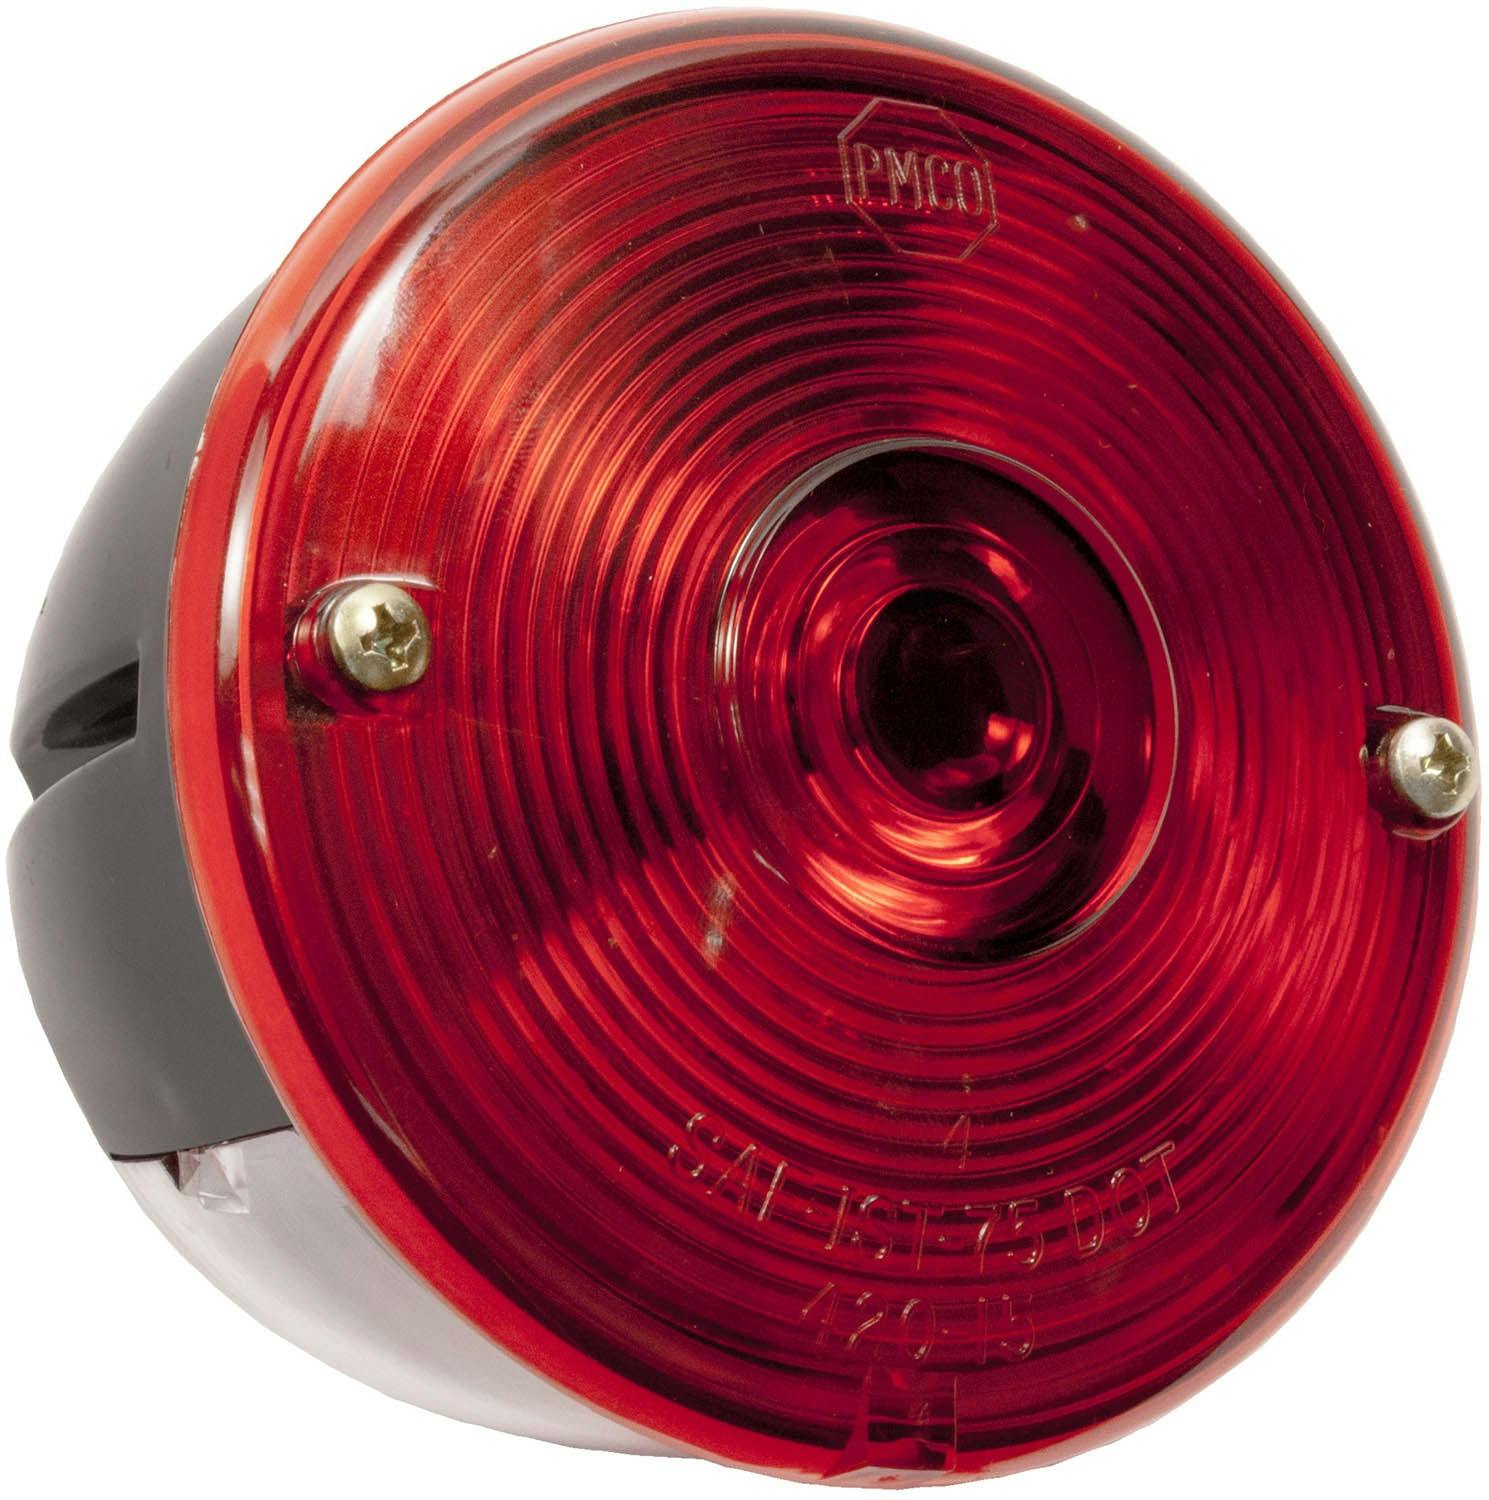 Incandescent Stop/Turn/Tail, Universal, Round, Stud-Mount, w/ License Light, 3.75"X2.625", red (Pack of 3)